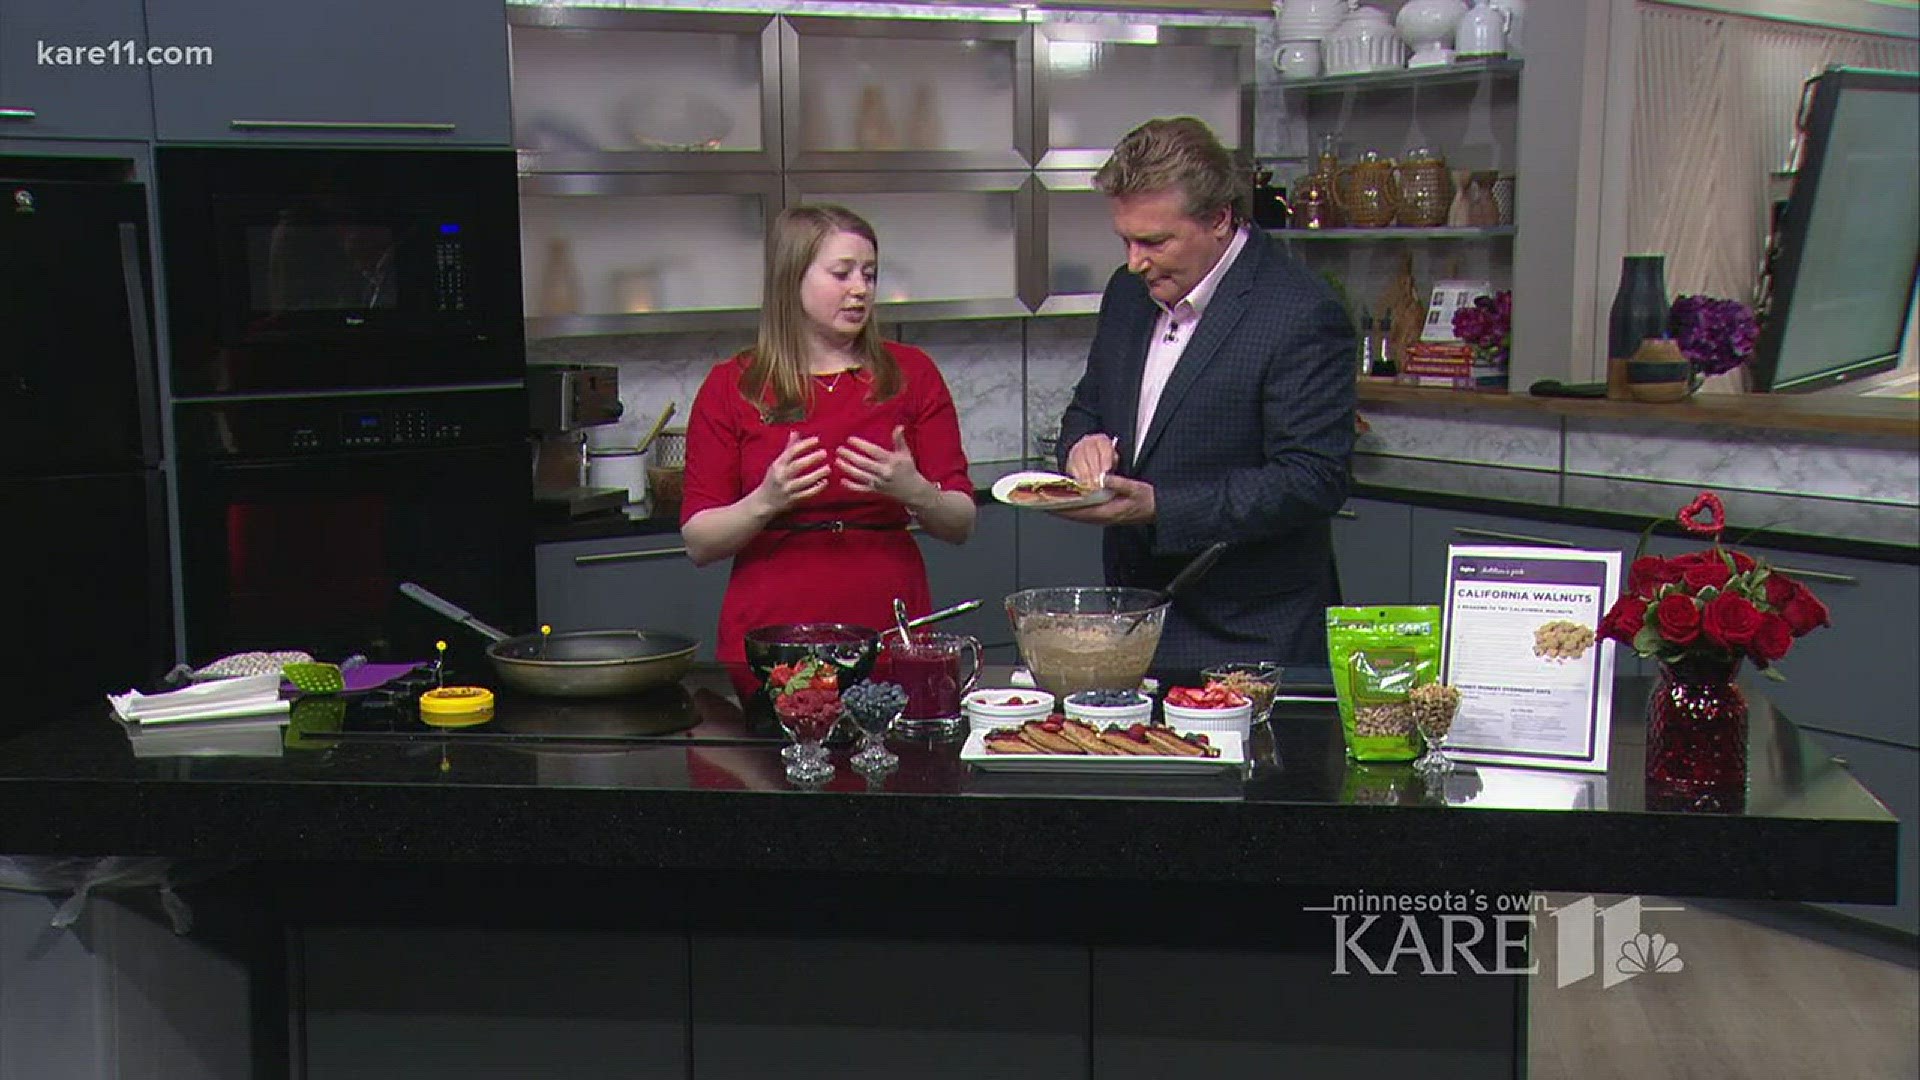 Melissa Bradley from Hy-Vee joins us on Saturday with Kare to bring some ideas on how to make a healthier, more filling breakfast.